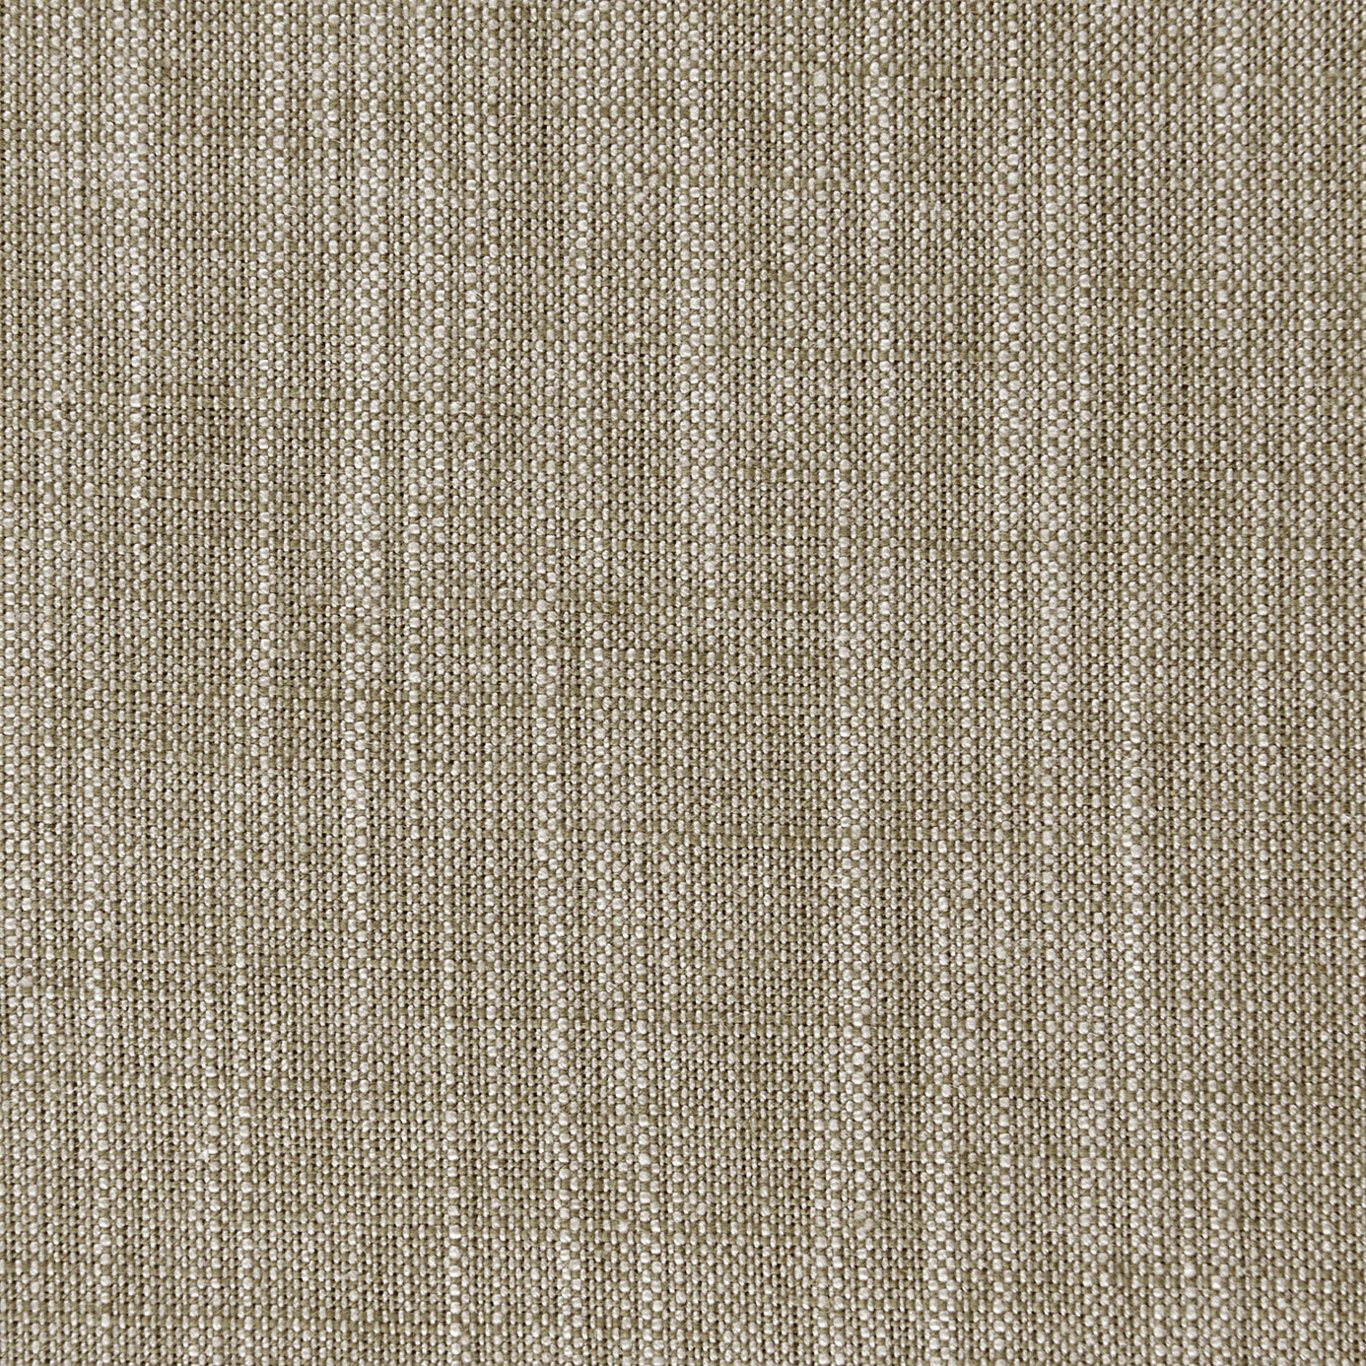 Biarritz Clay Fabric by CNC